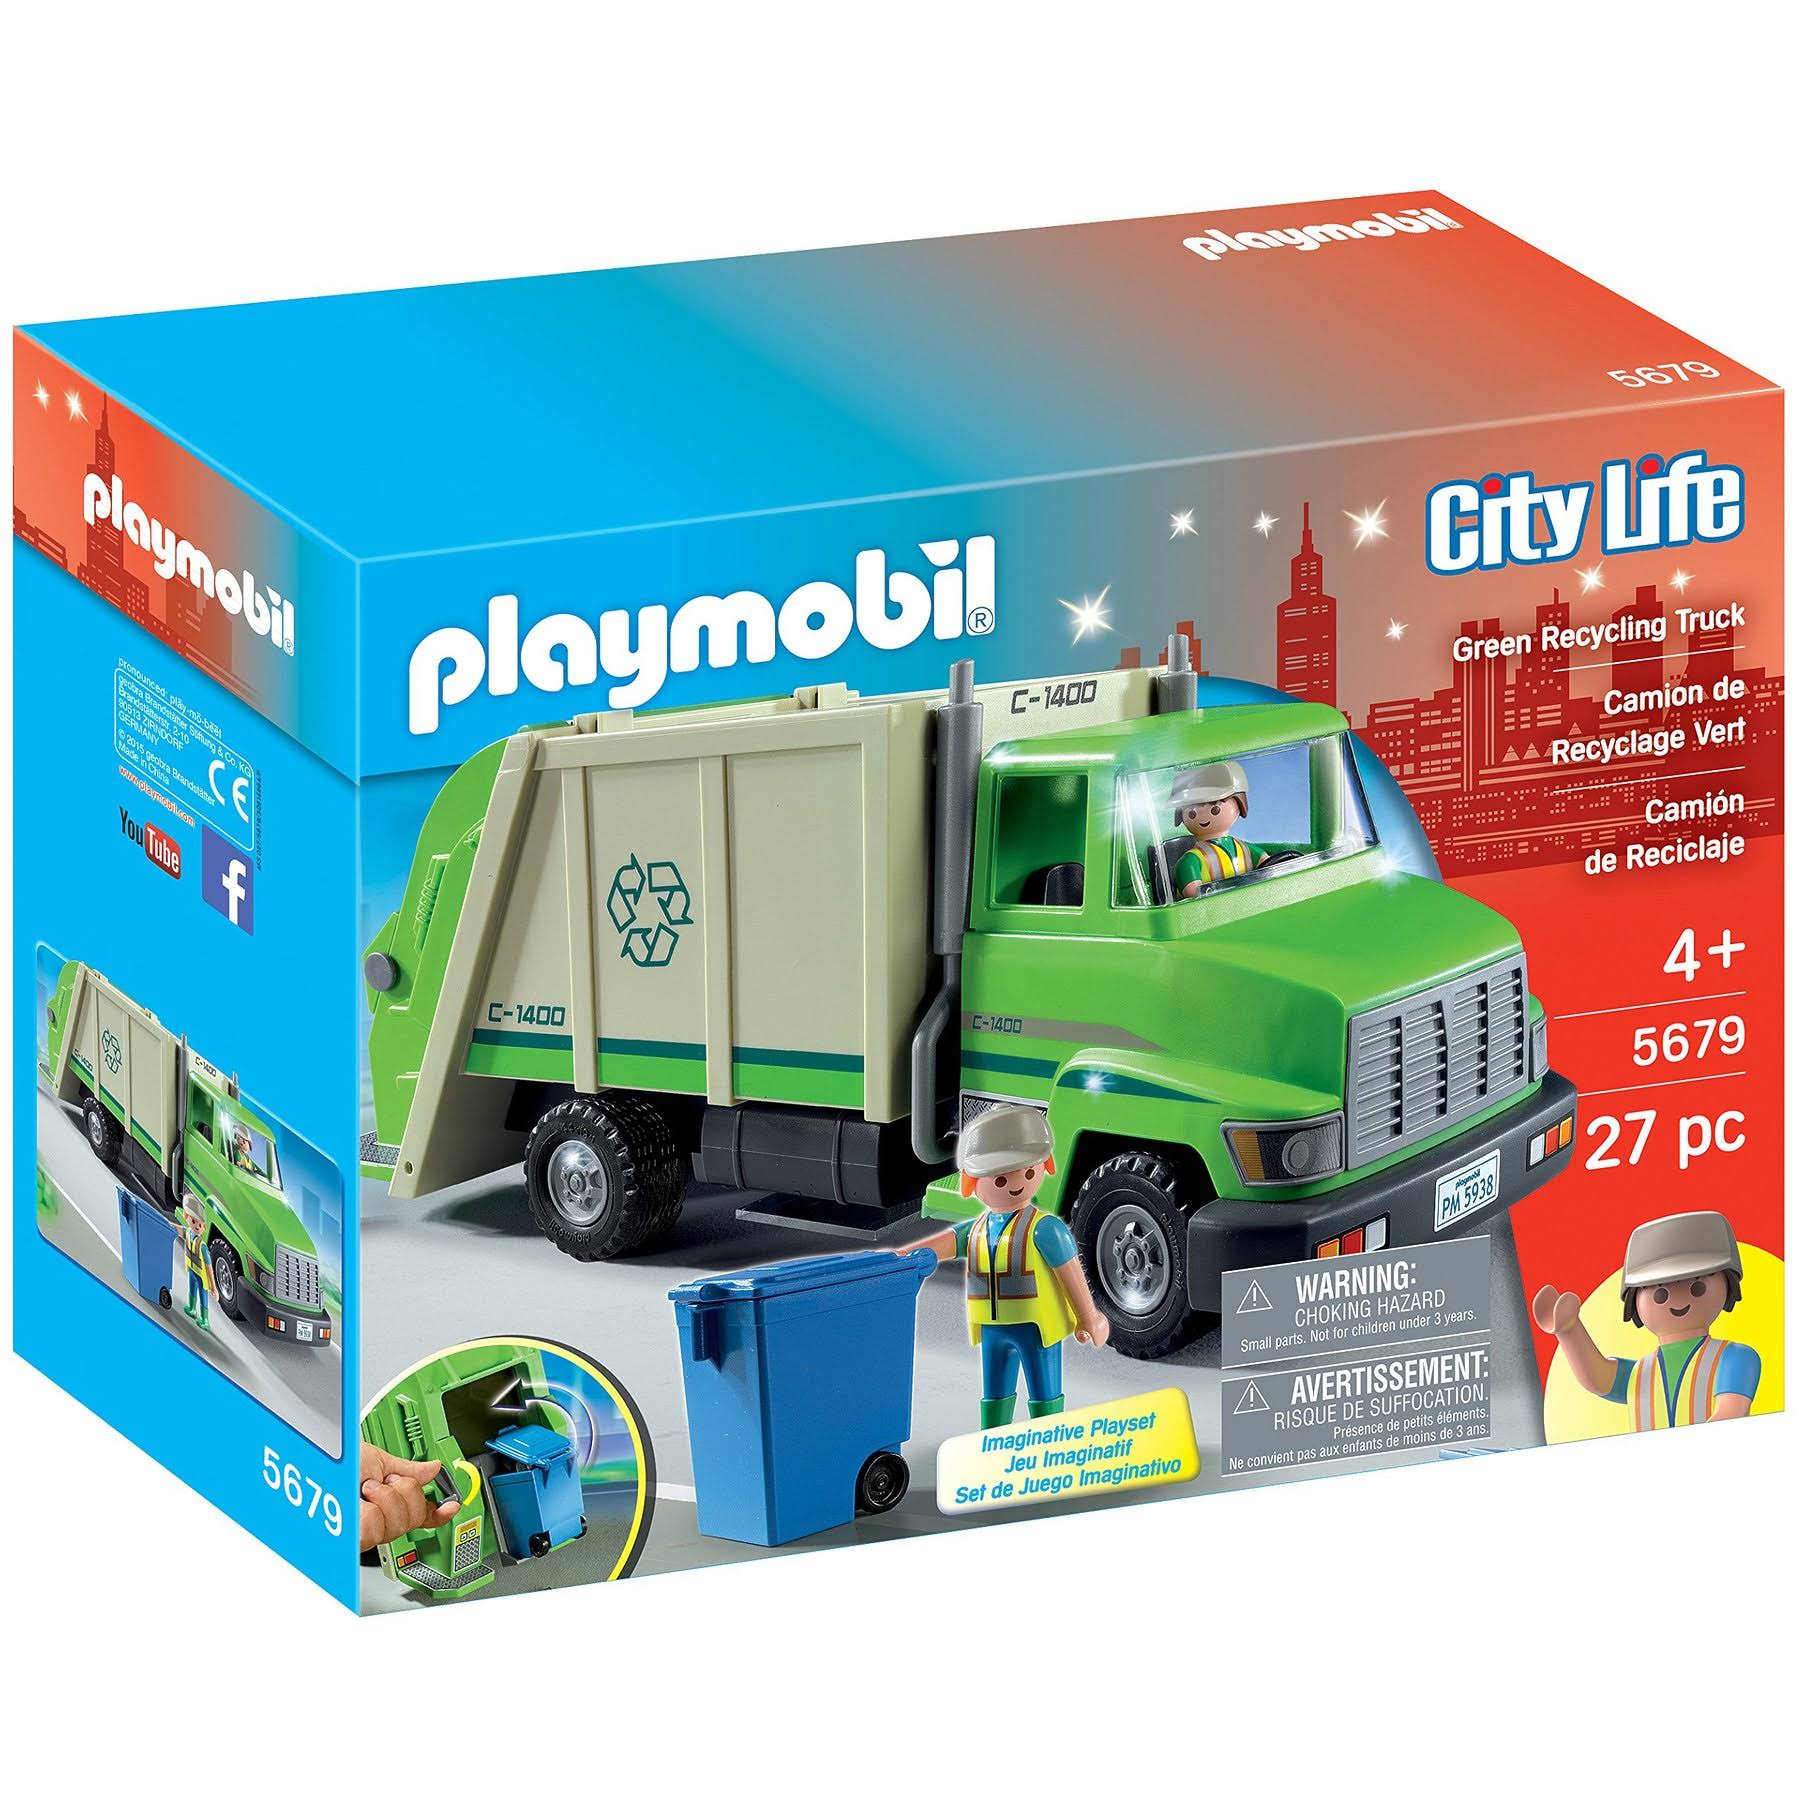 Playmobil City Life Green Recycling Truck - 27 Pieces